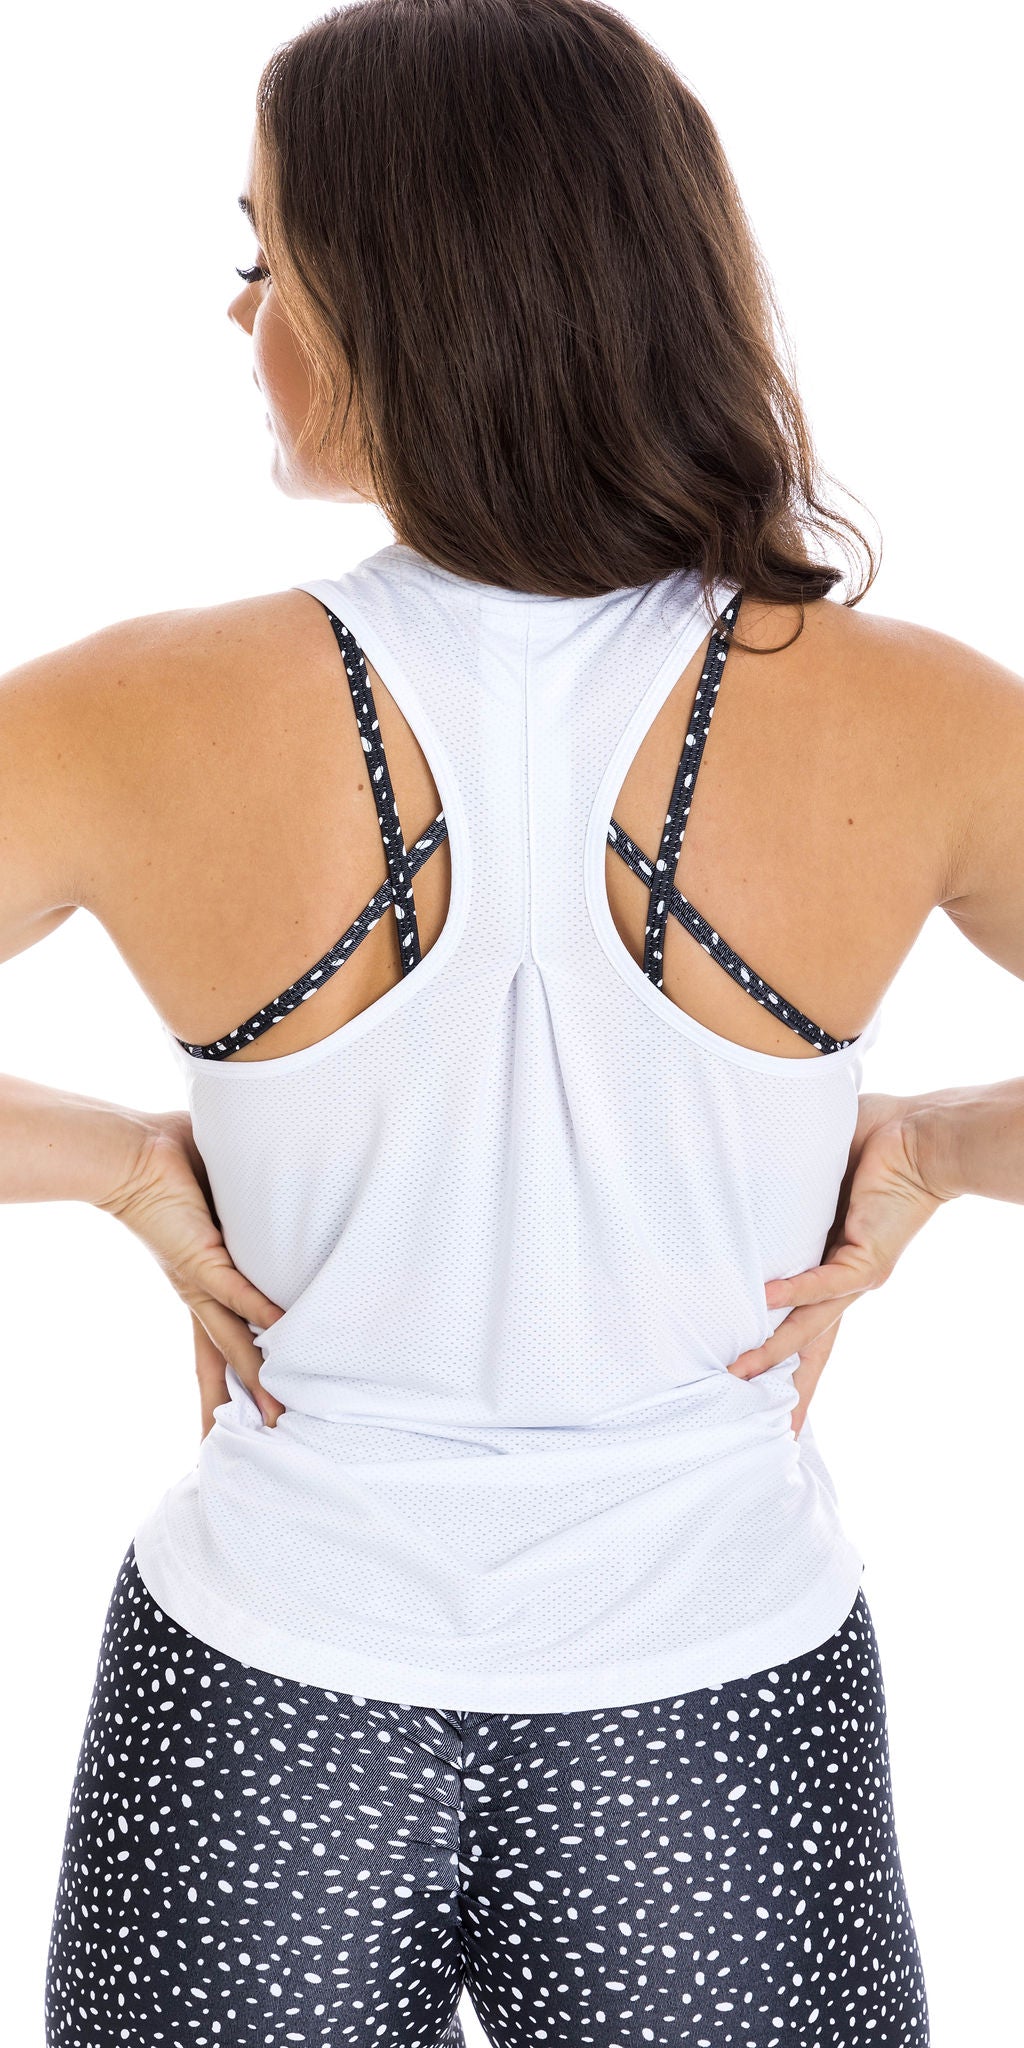 Rear view of lady in sleeveless White Meshed Racer Back Tank and black dotted leggings putting both hands on waist